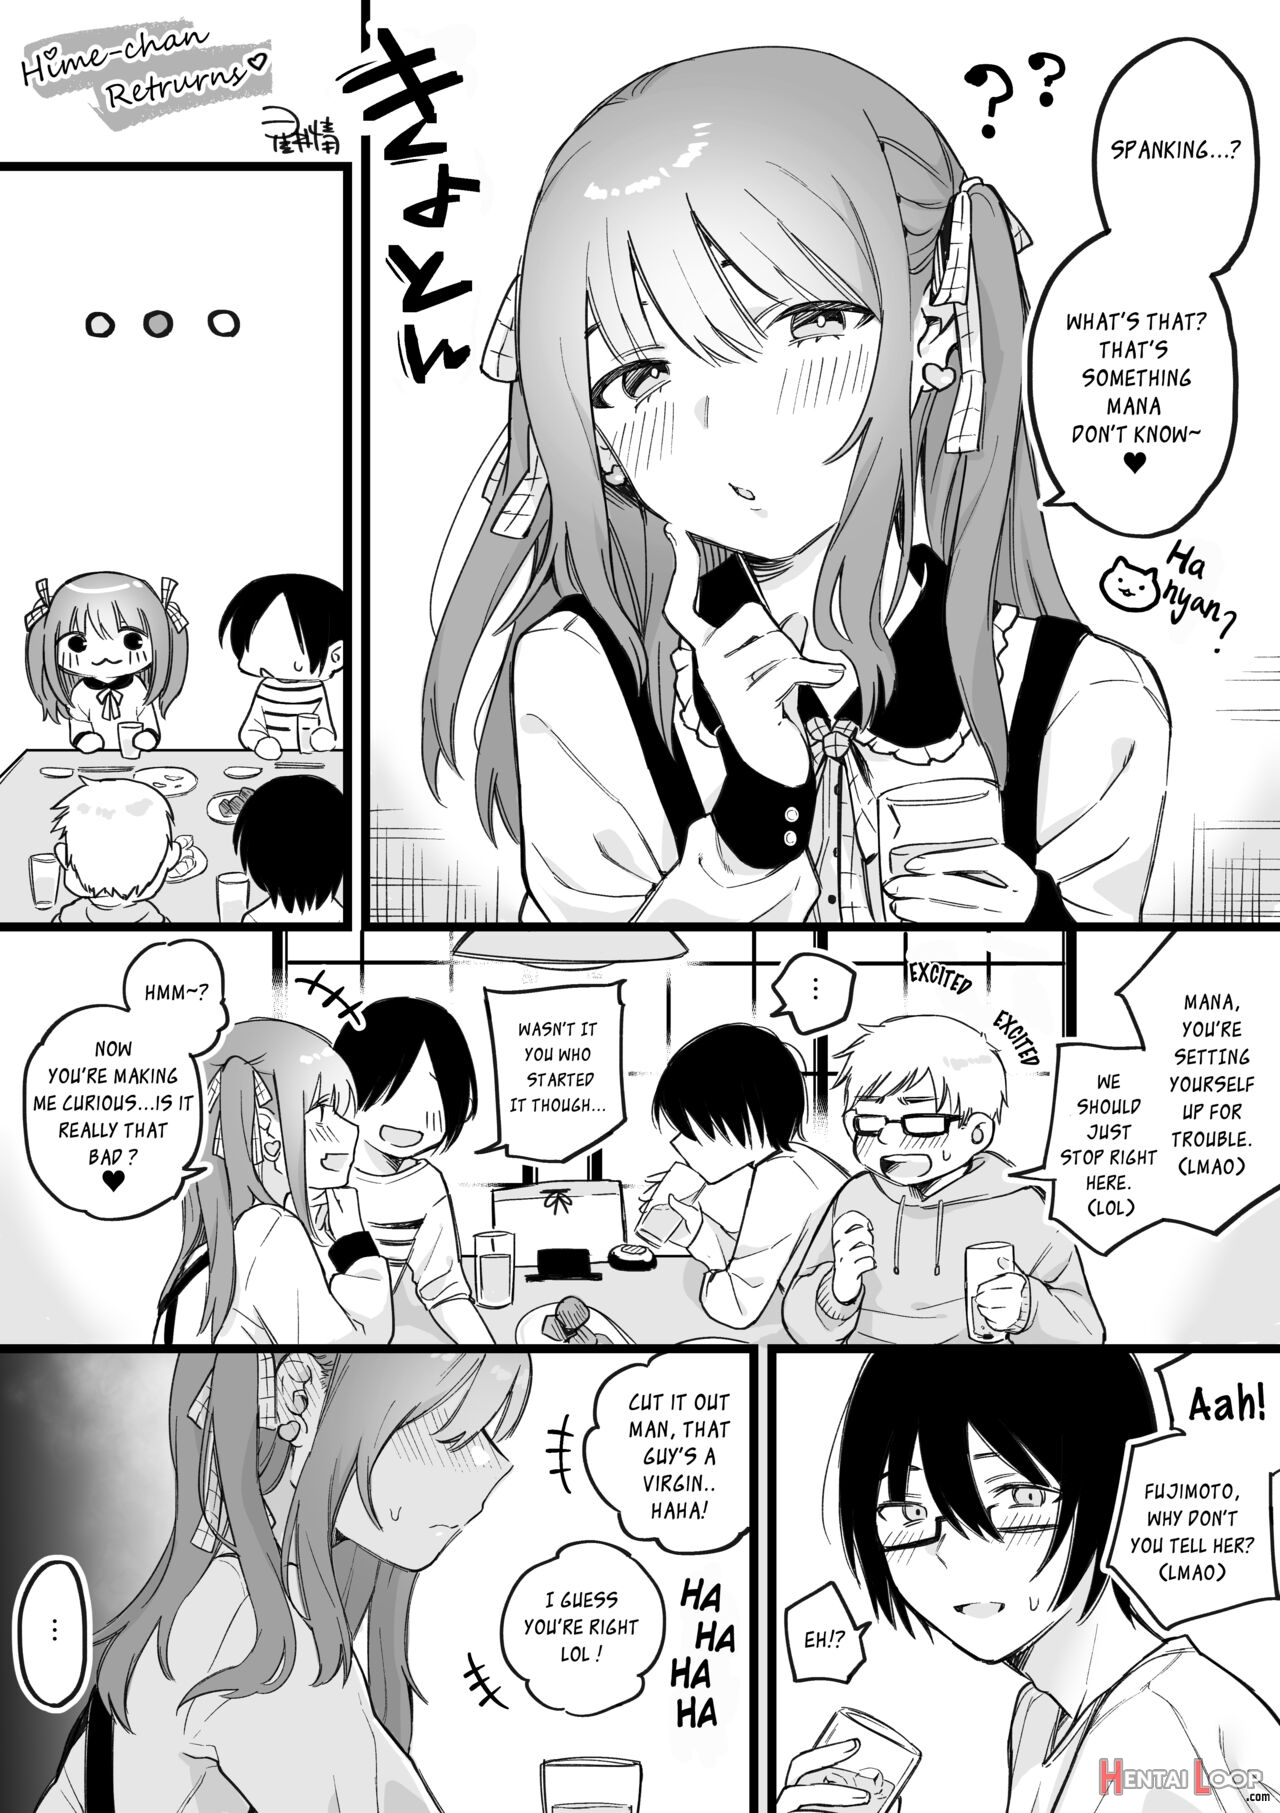 Hime-chan Total Defeat + Hime-chan Returns. page 5